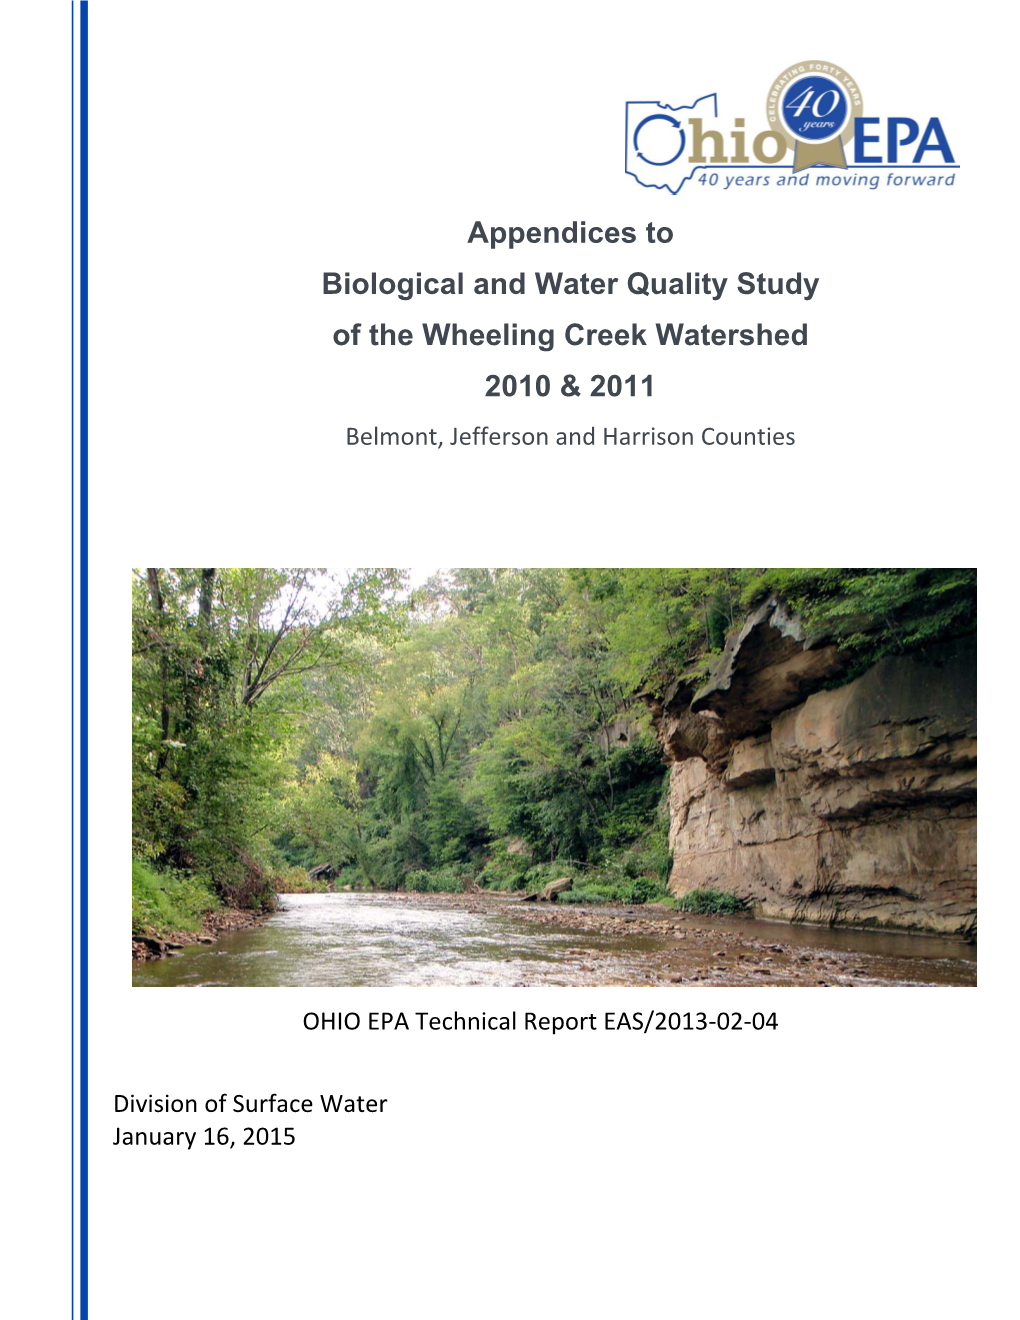 Appendices to Biological and Water Quality Study of the Wheeling Creek Watershed 2010 & 2011 Belmont, Jefferson and Harrison Counties